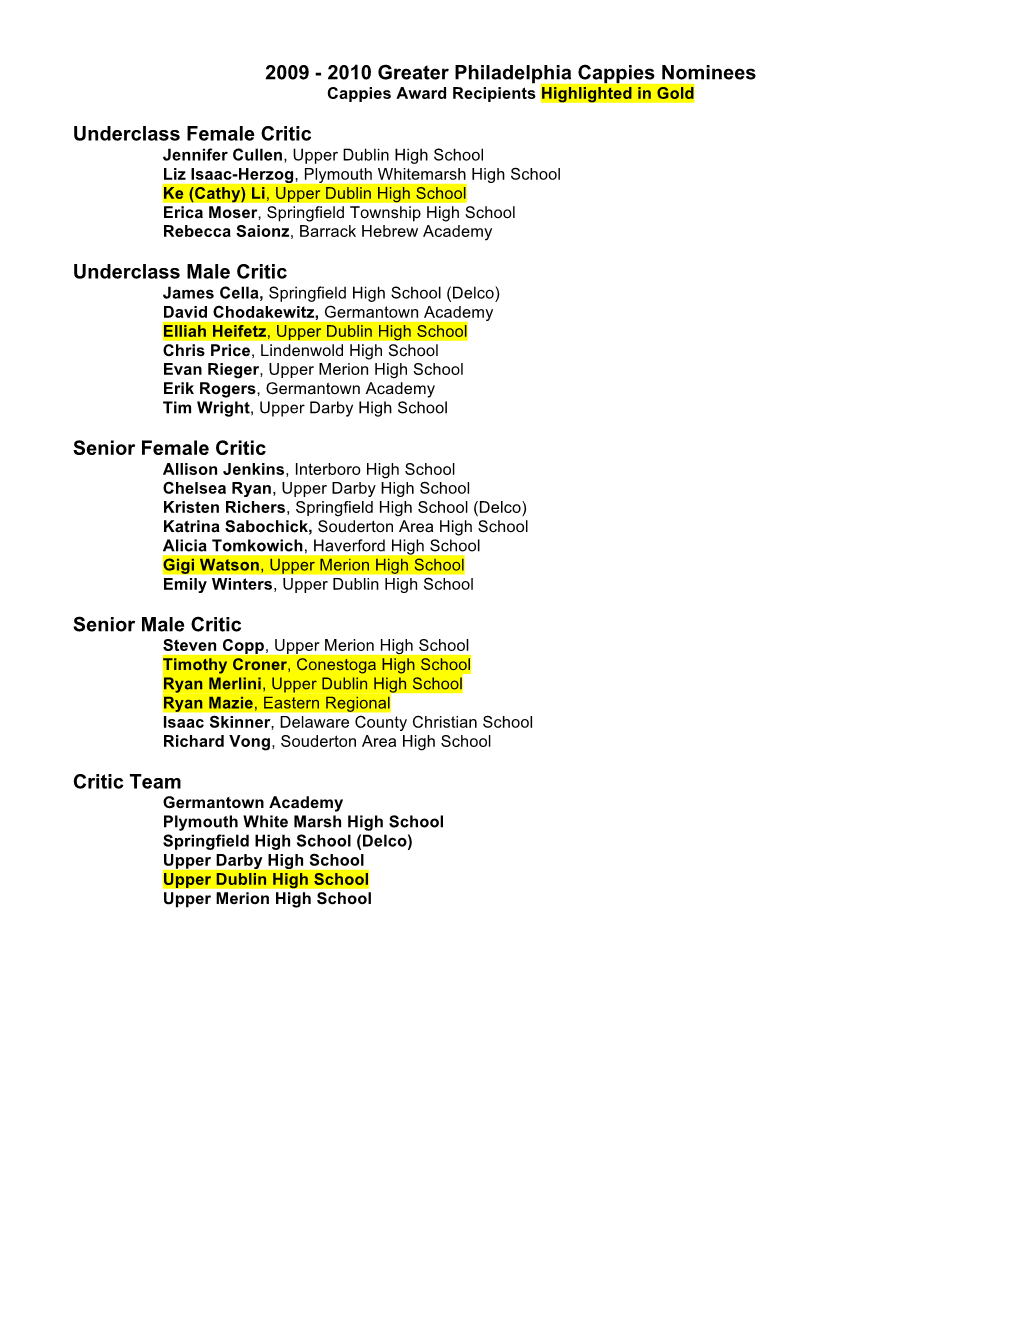 2009 - 2010 Greater Philadelphia Cappies Nominees Cappies Award Recipients Highlighted in Gold